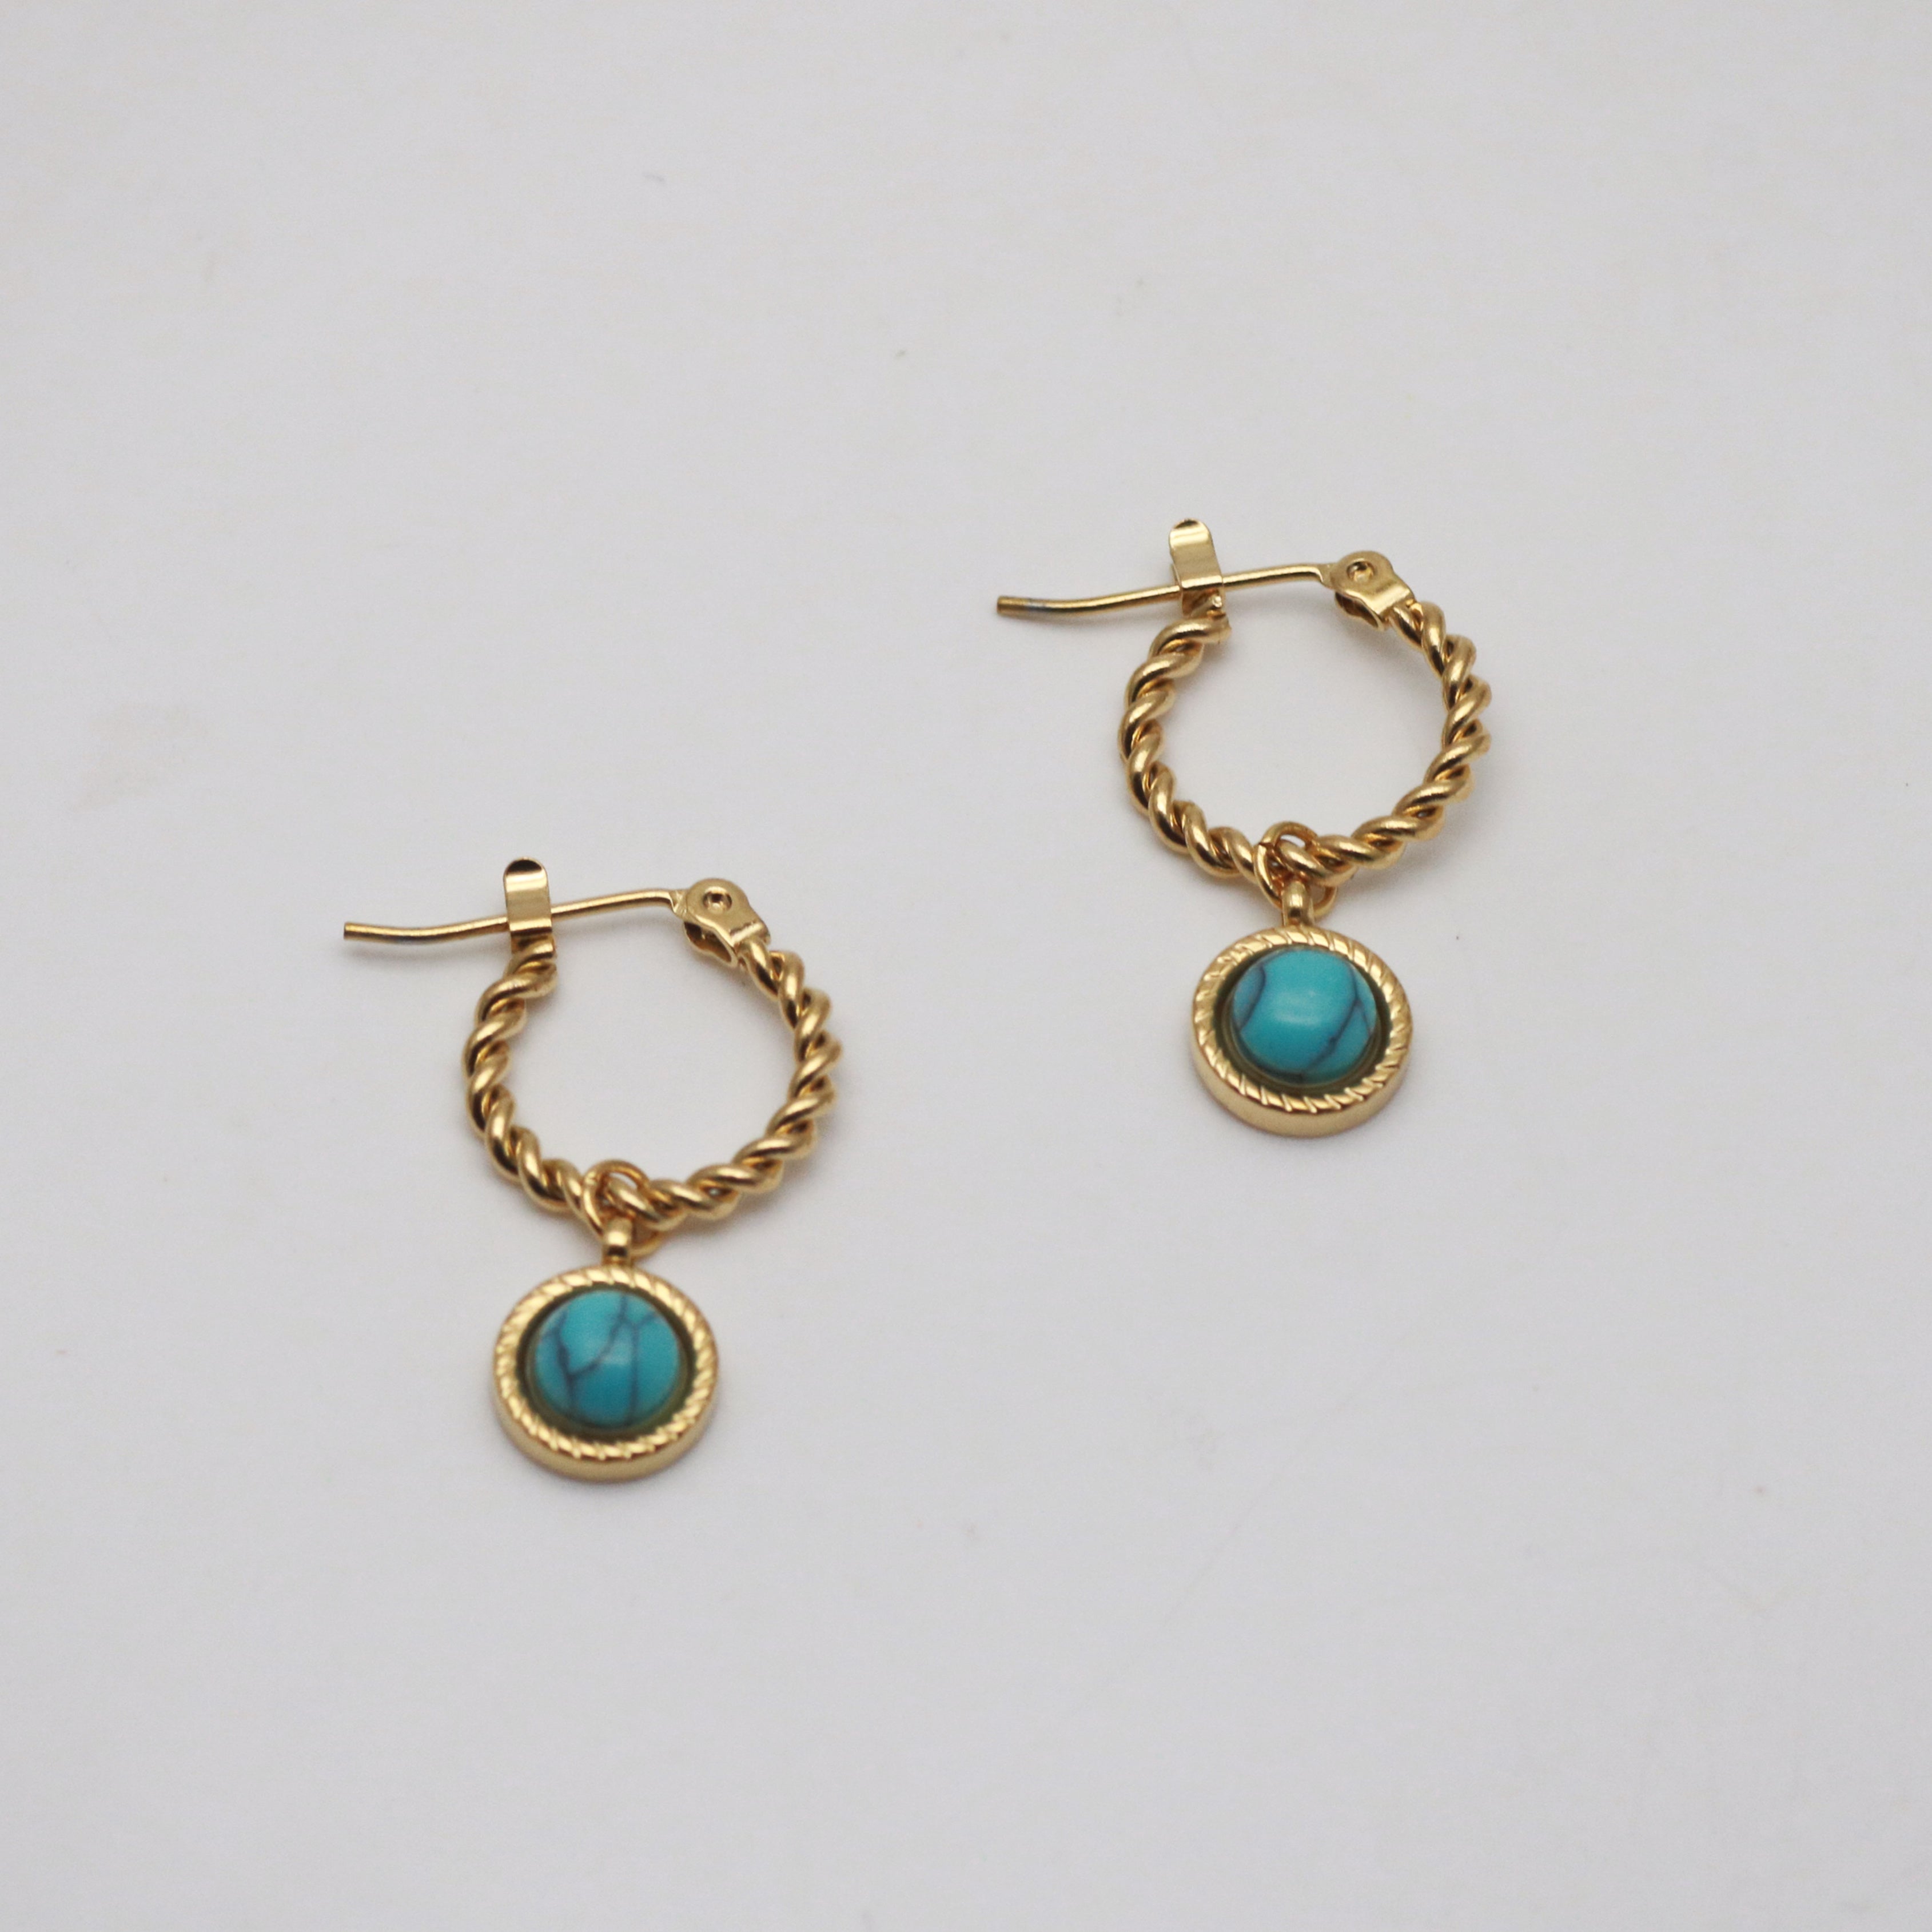 gold hoop earrings with turquoise stone charm